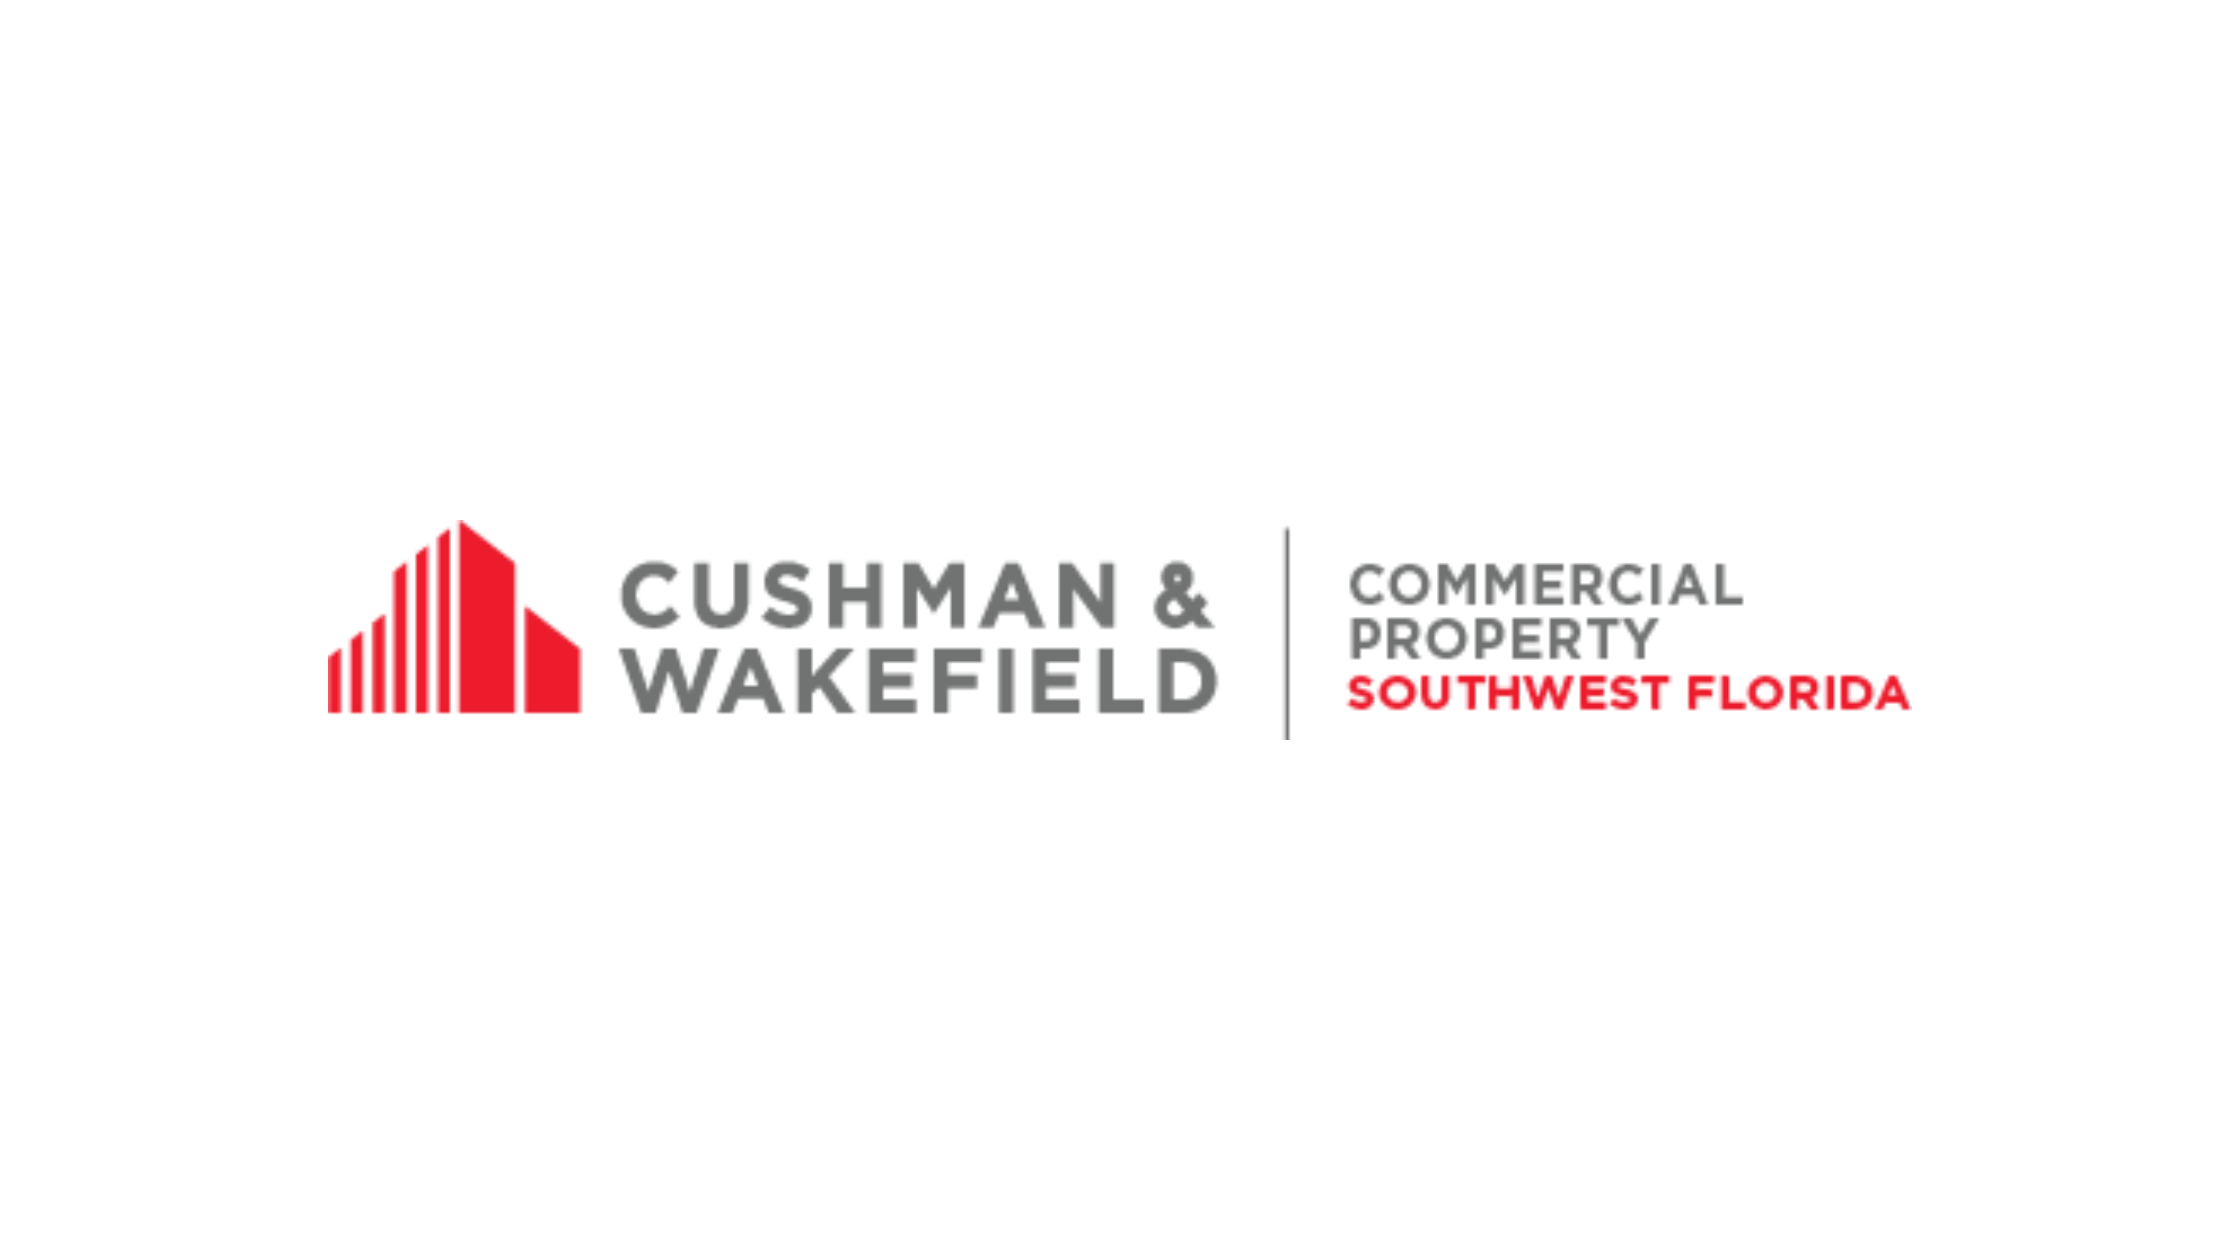 Cushman & Wakefield | Commercial Property Southwest Florida brokers $8.9 million sale of Naples land